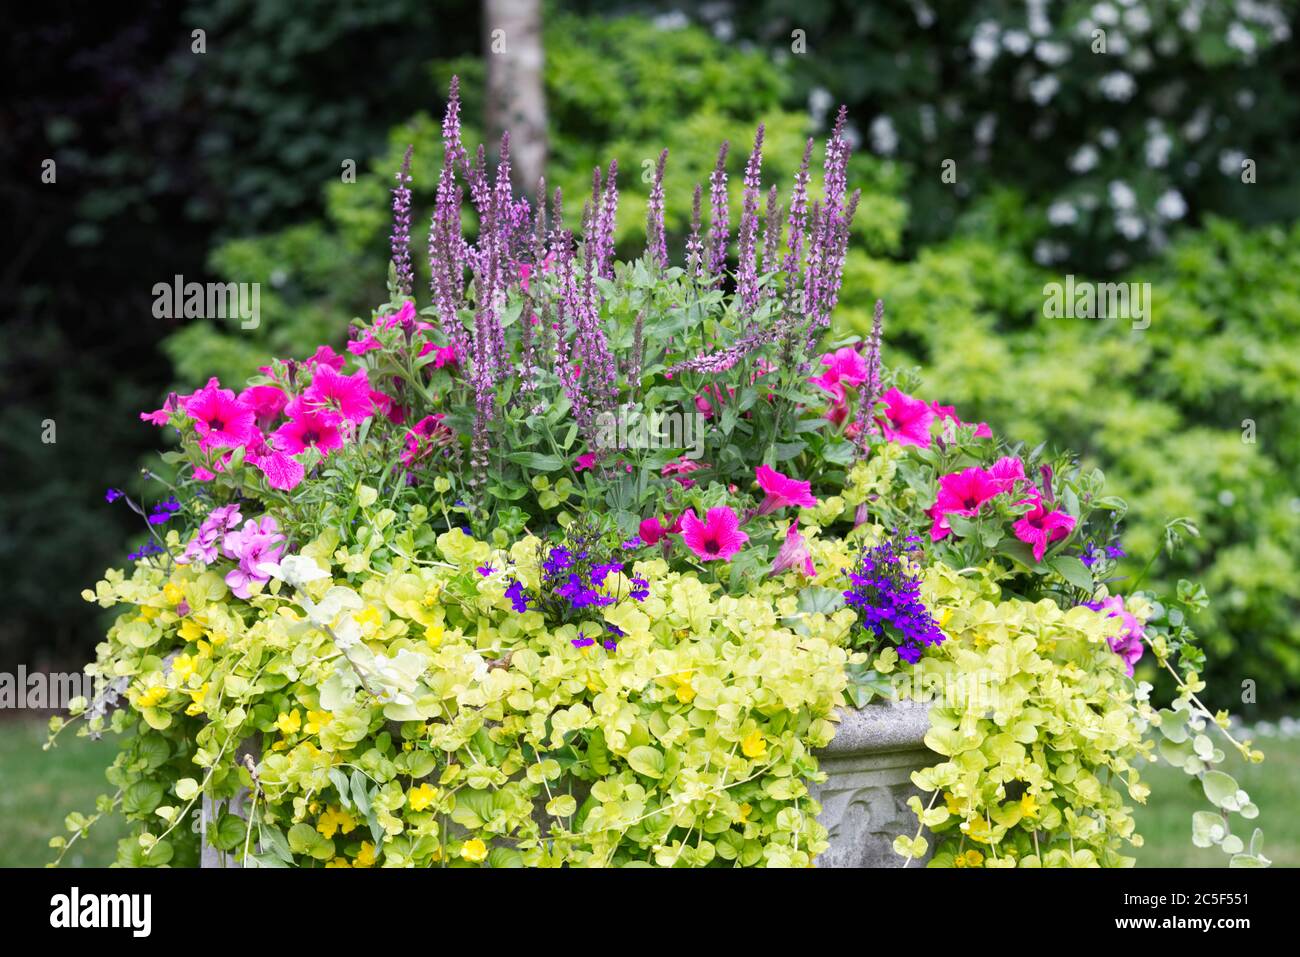 Summer planting combination in a stone planter. Stock Photo